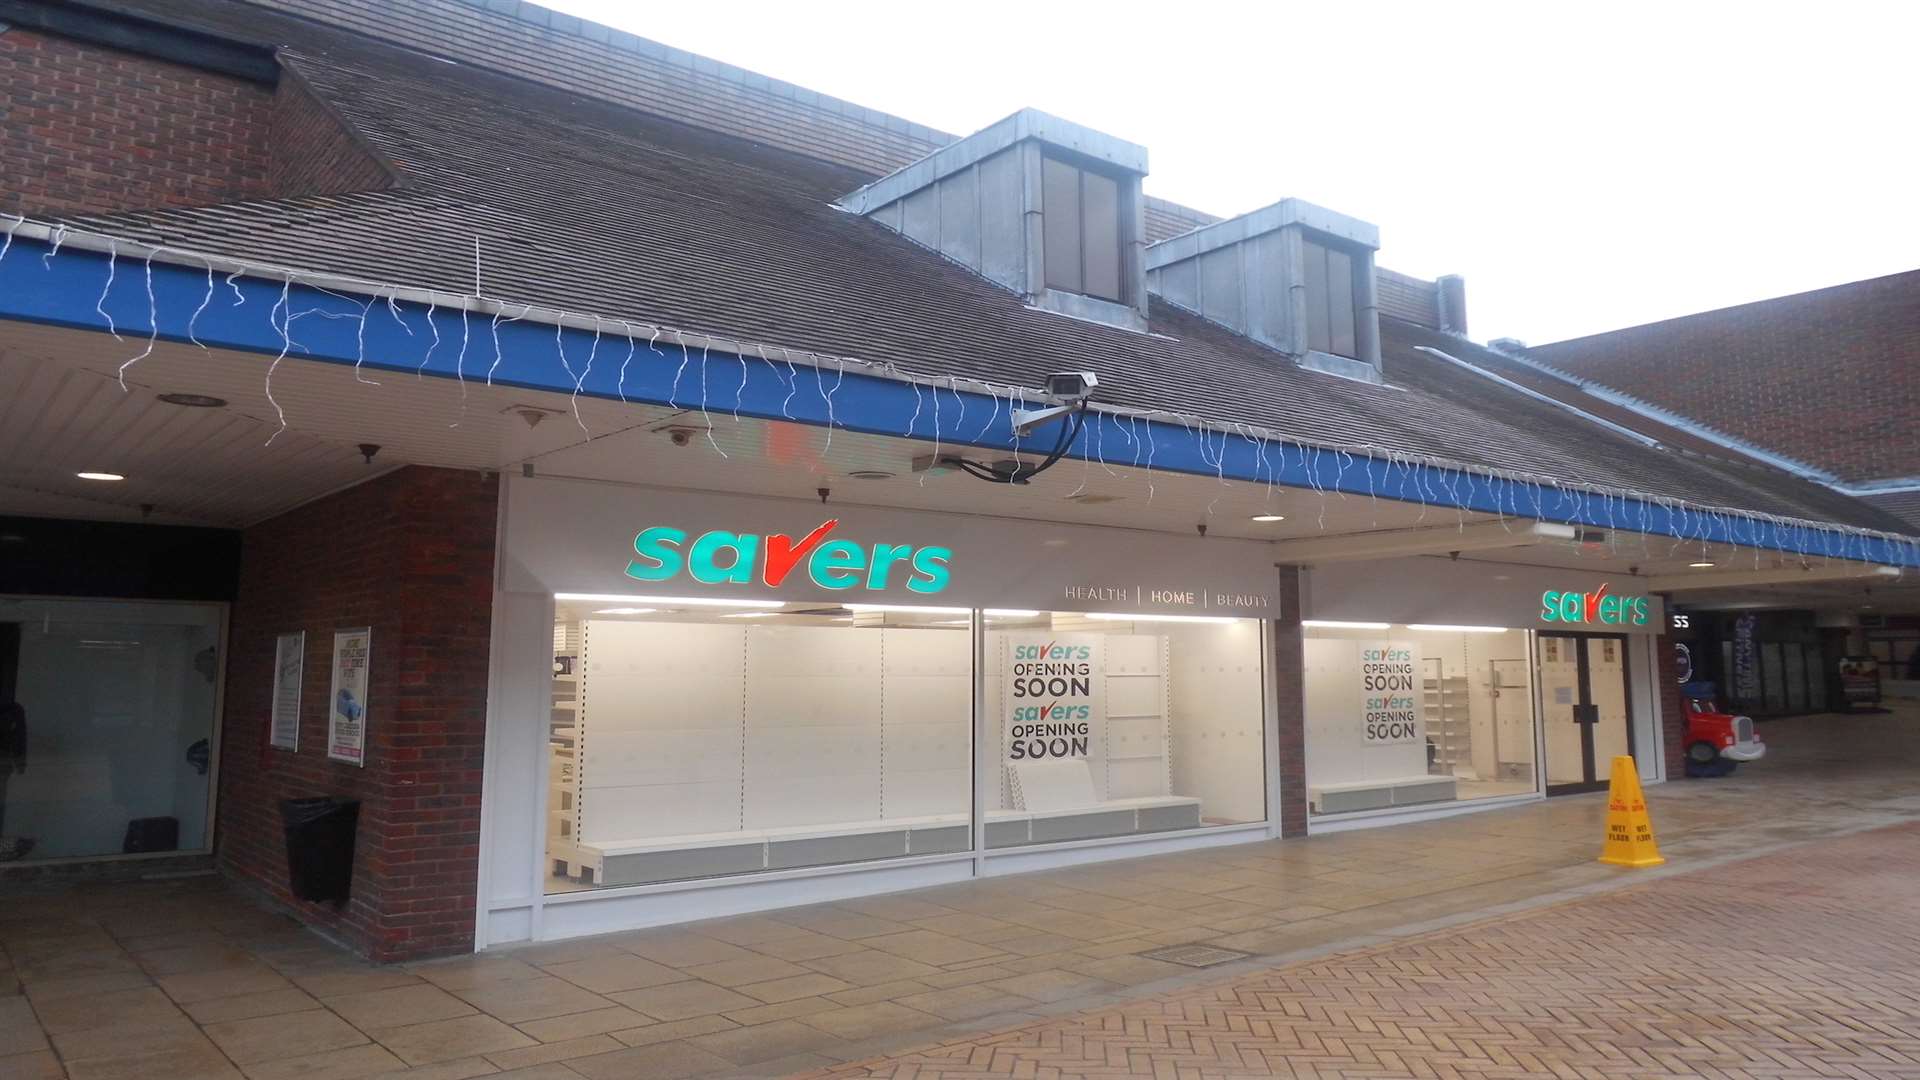 Savers is due to open soon at the shopping centre